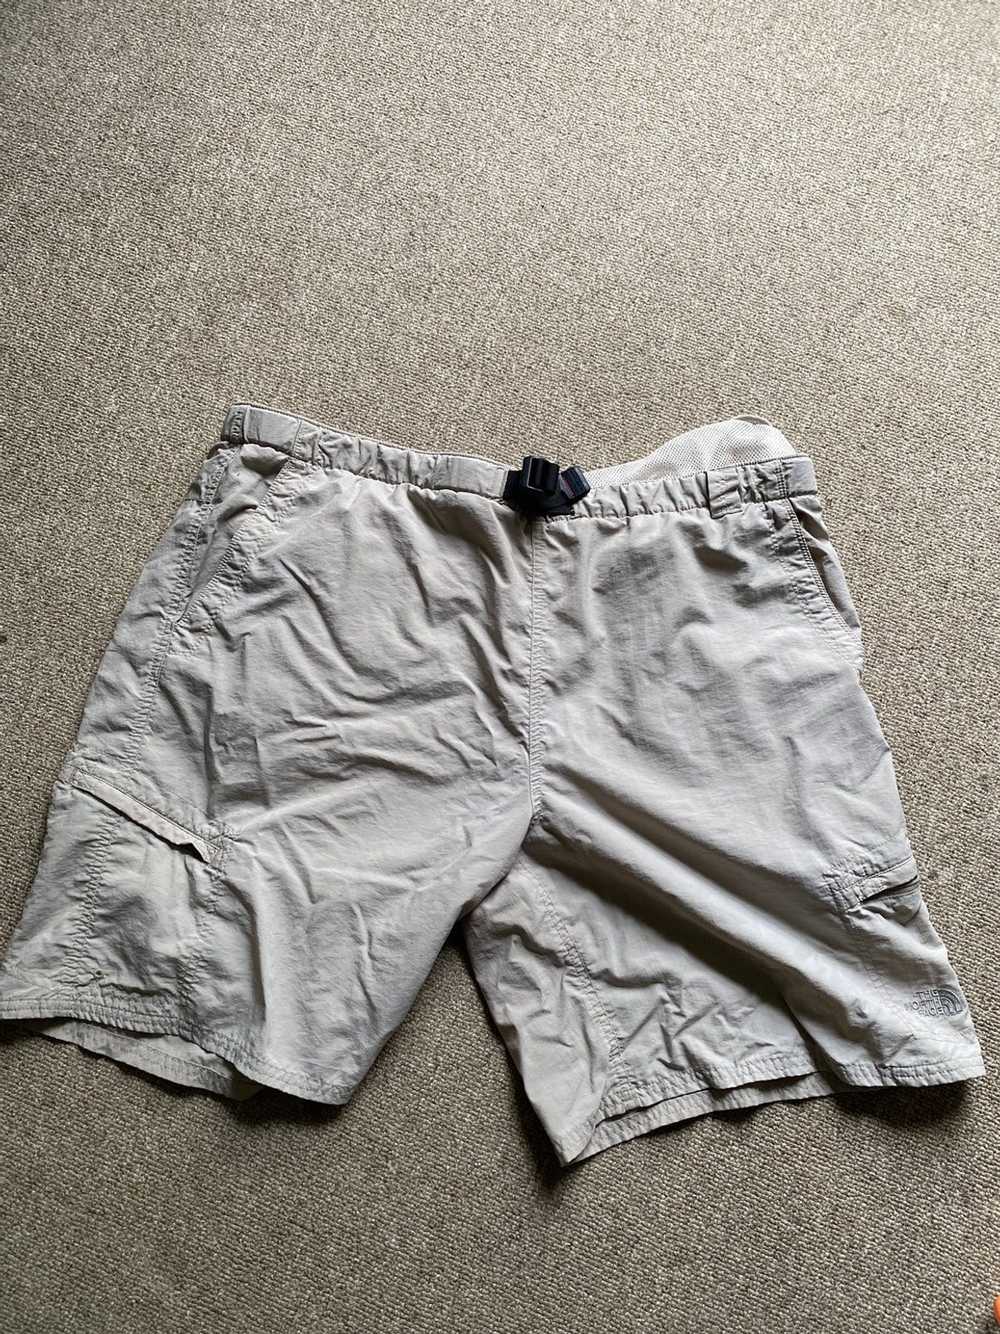 The North Face North face beige shorts xl - image 1